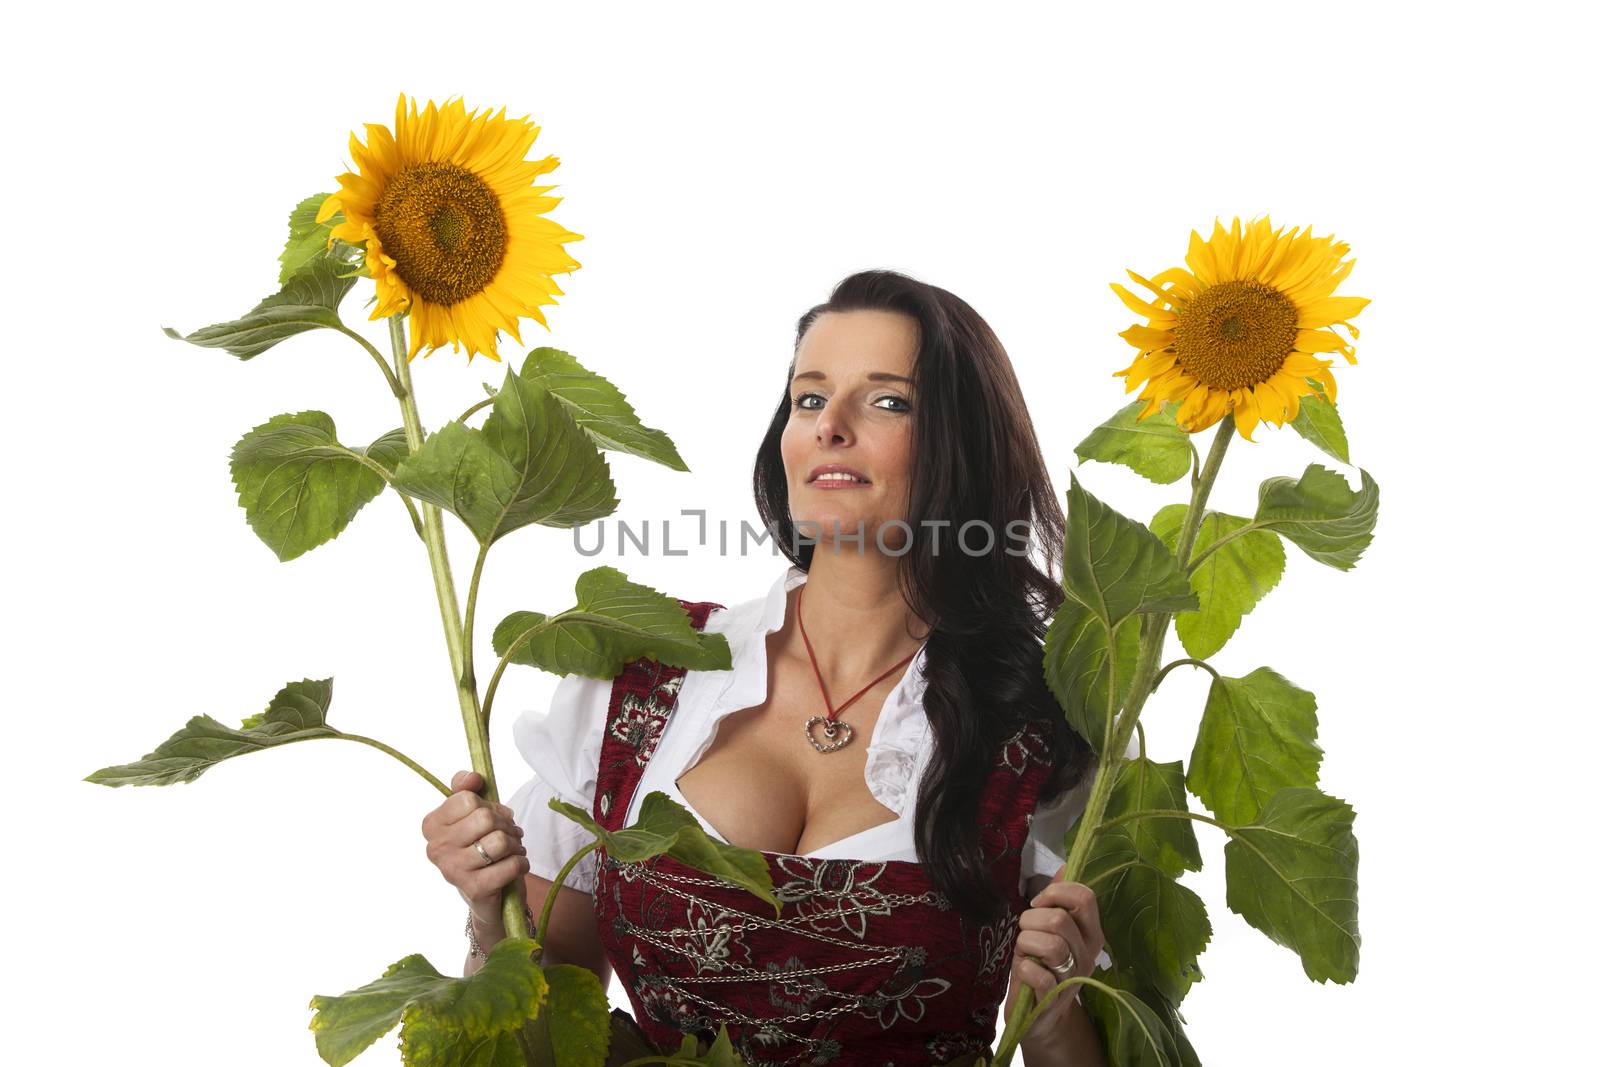 bavarian woman in a dirndl with sunflowers by bernjuer